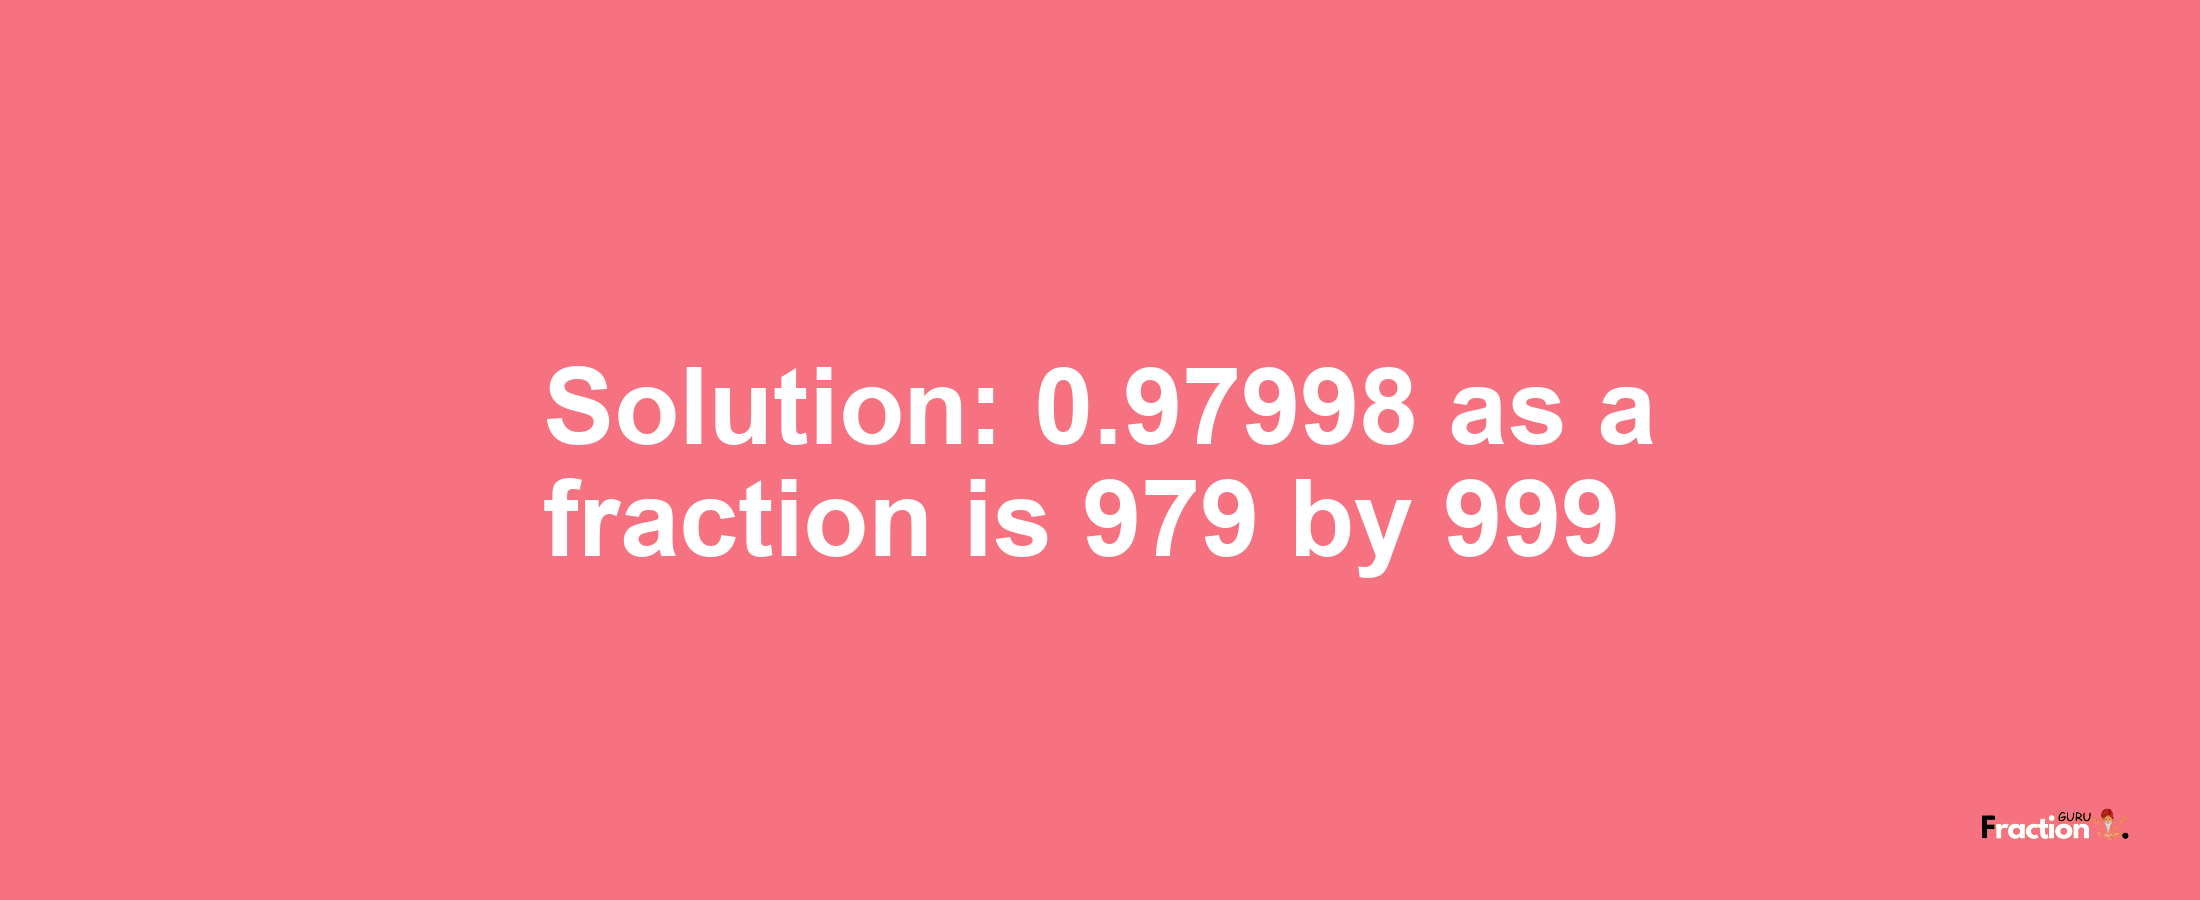 Solution:0.97998 as a fraction is 979/999